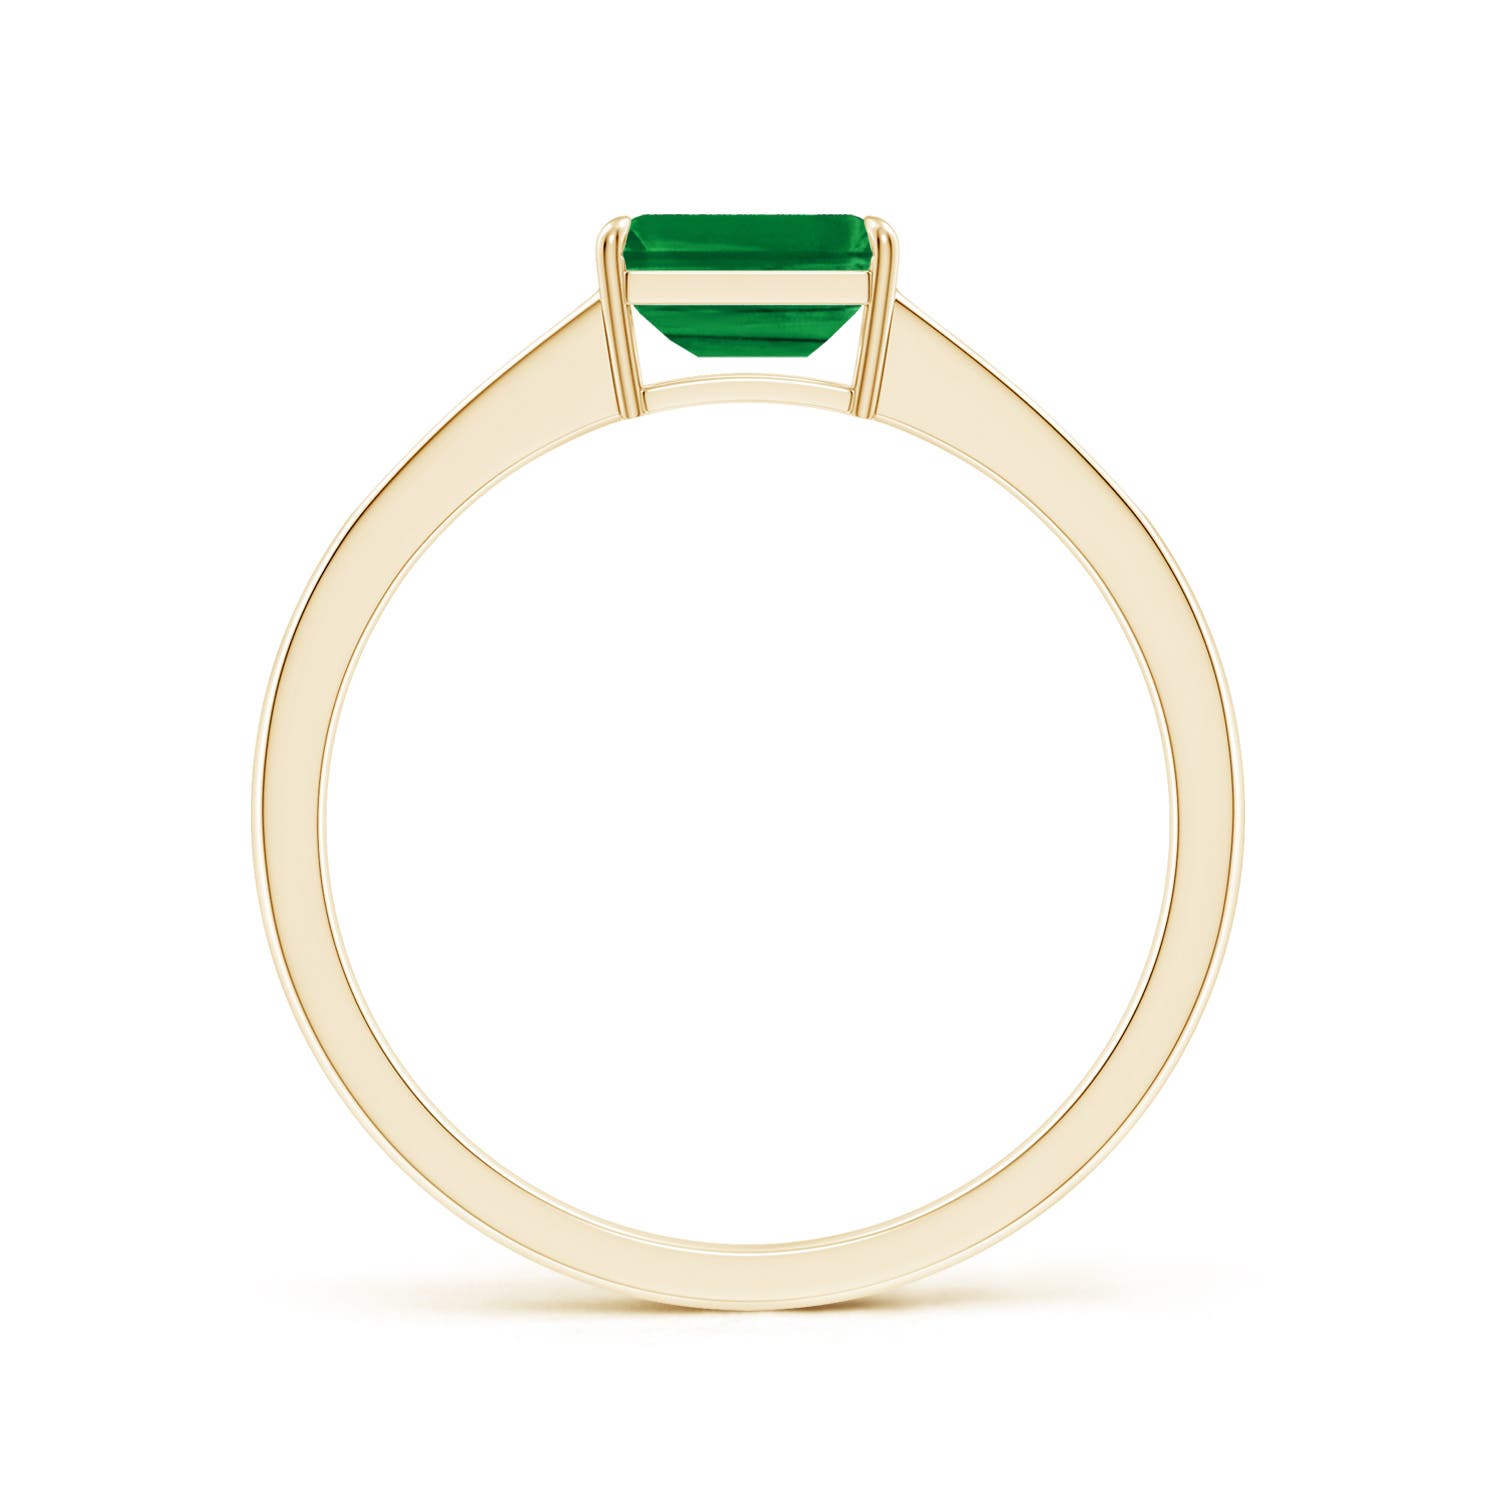 AAA - Emerald / 0.61 CT / 14 KT Yellow Gold